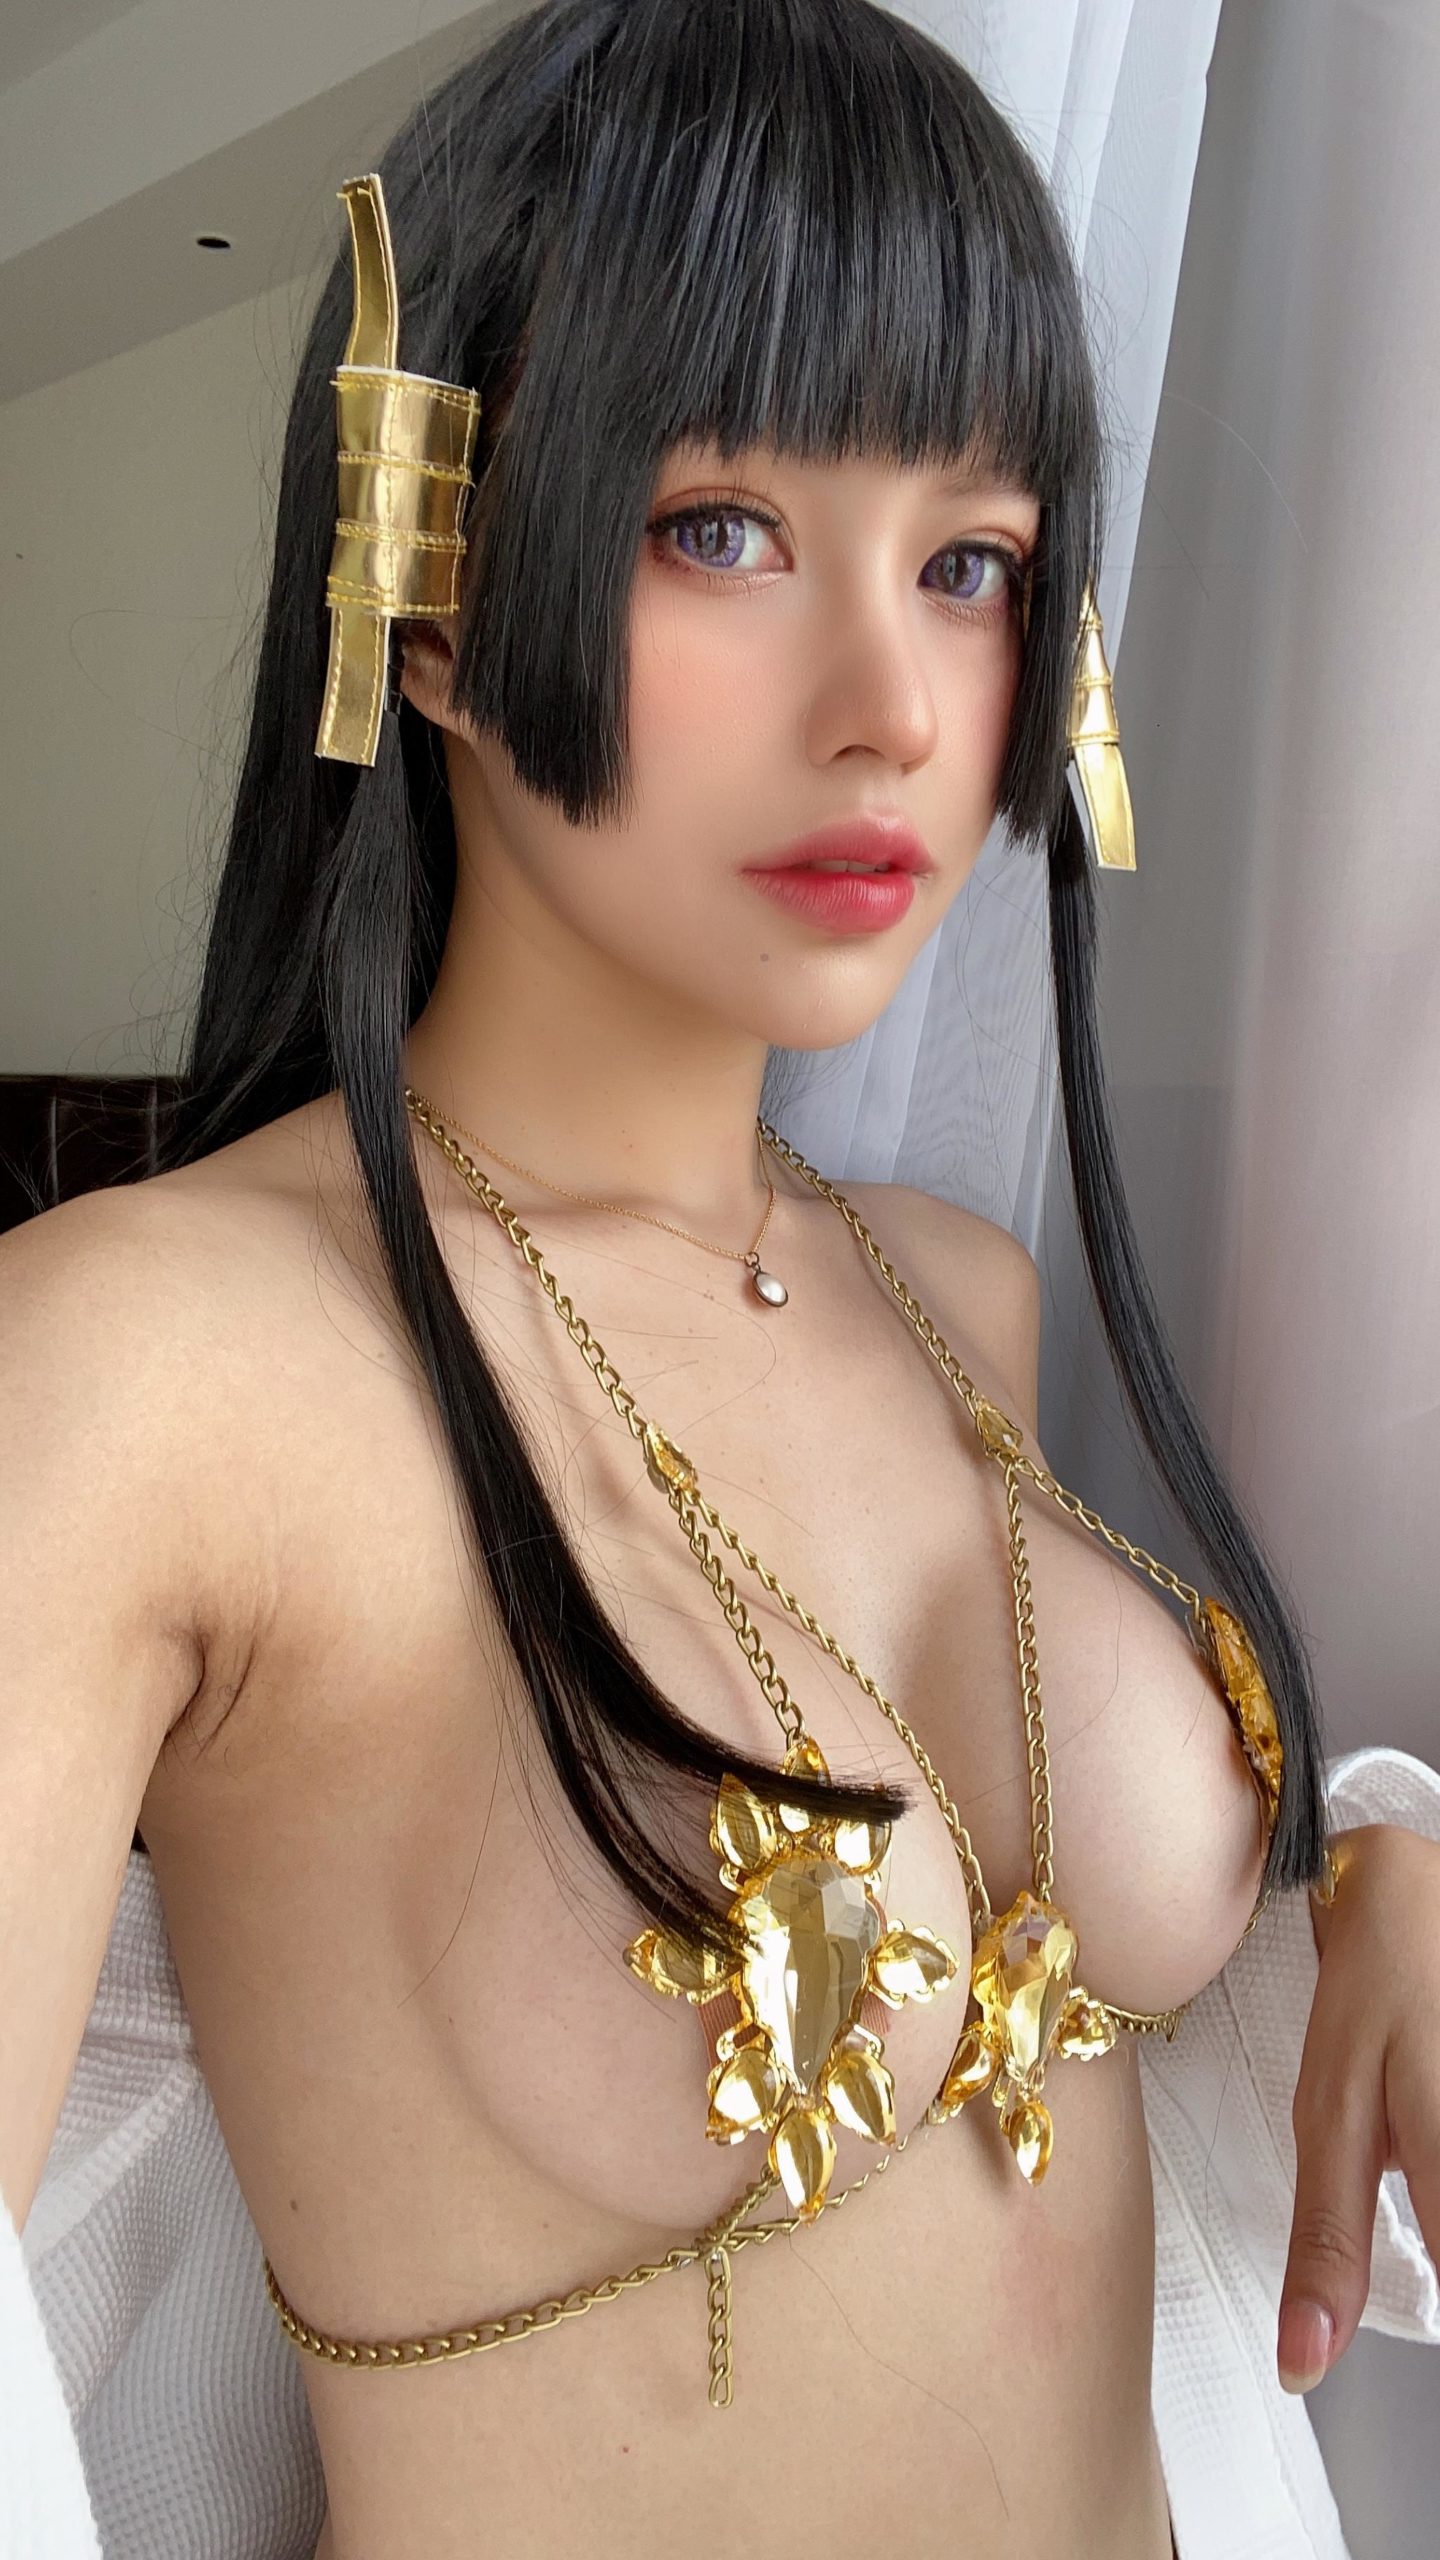 DeadorAlive Nyotengu Cosplay by PingPing 2022 39 scaled 1